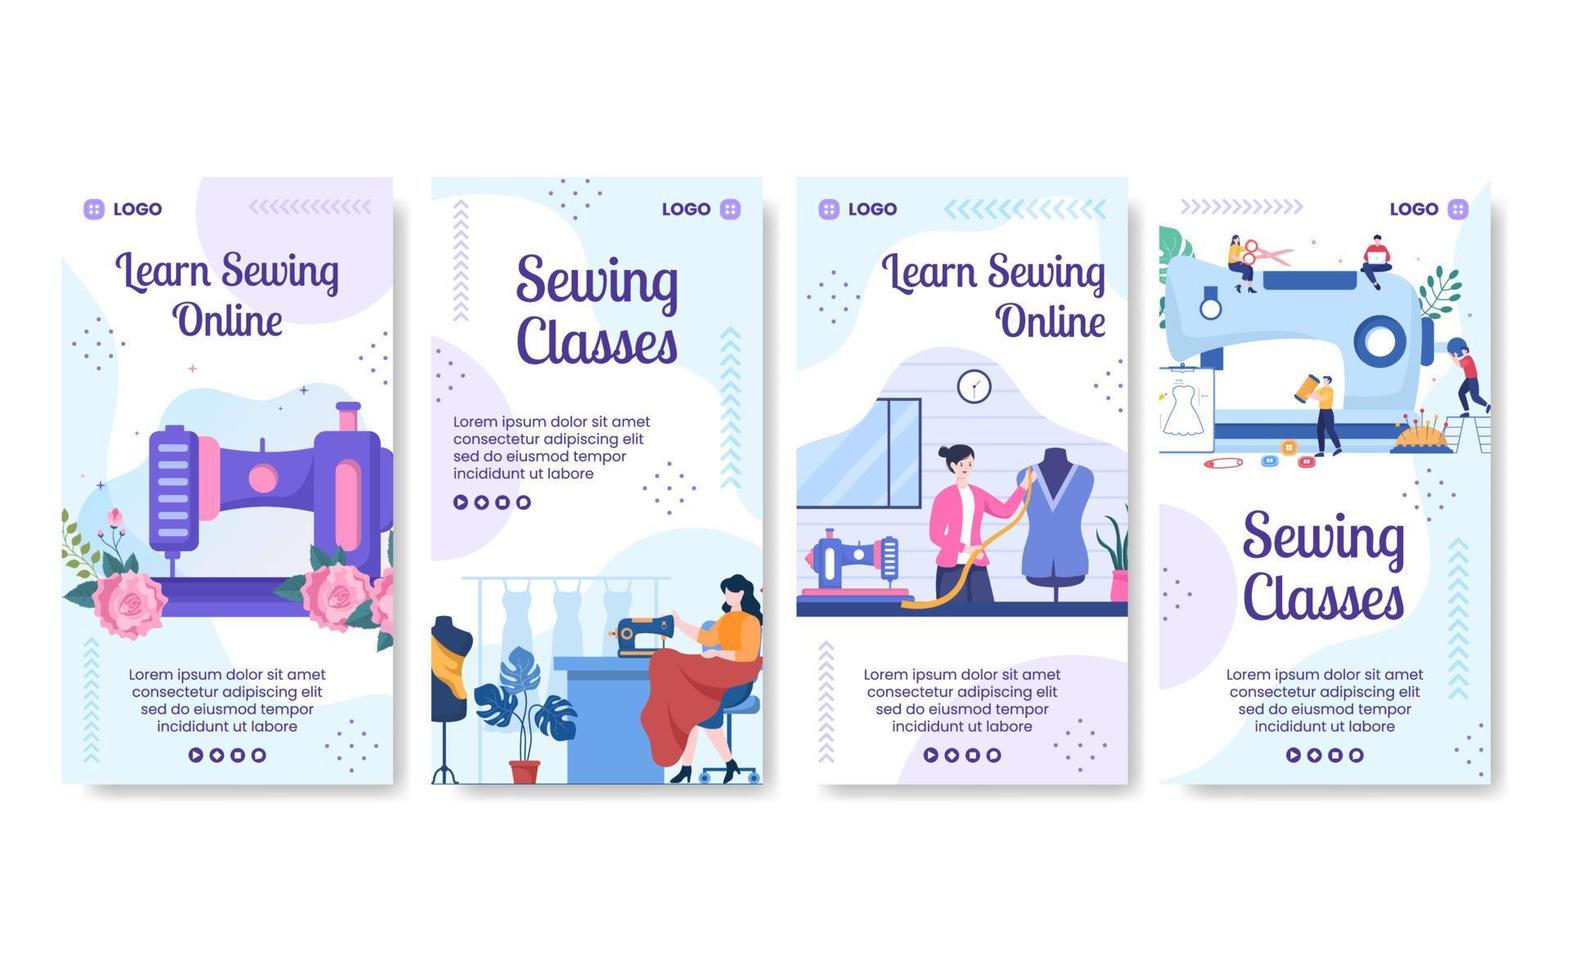 Sewing or Tailor Classes Stories Template Flat Illustration Editable of Square Background Suitable for Social media, Greeting Card and Web Internet vector